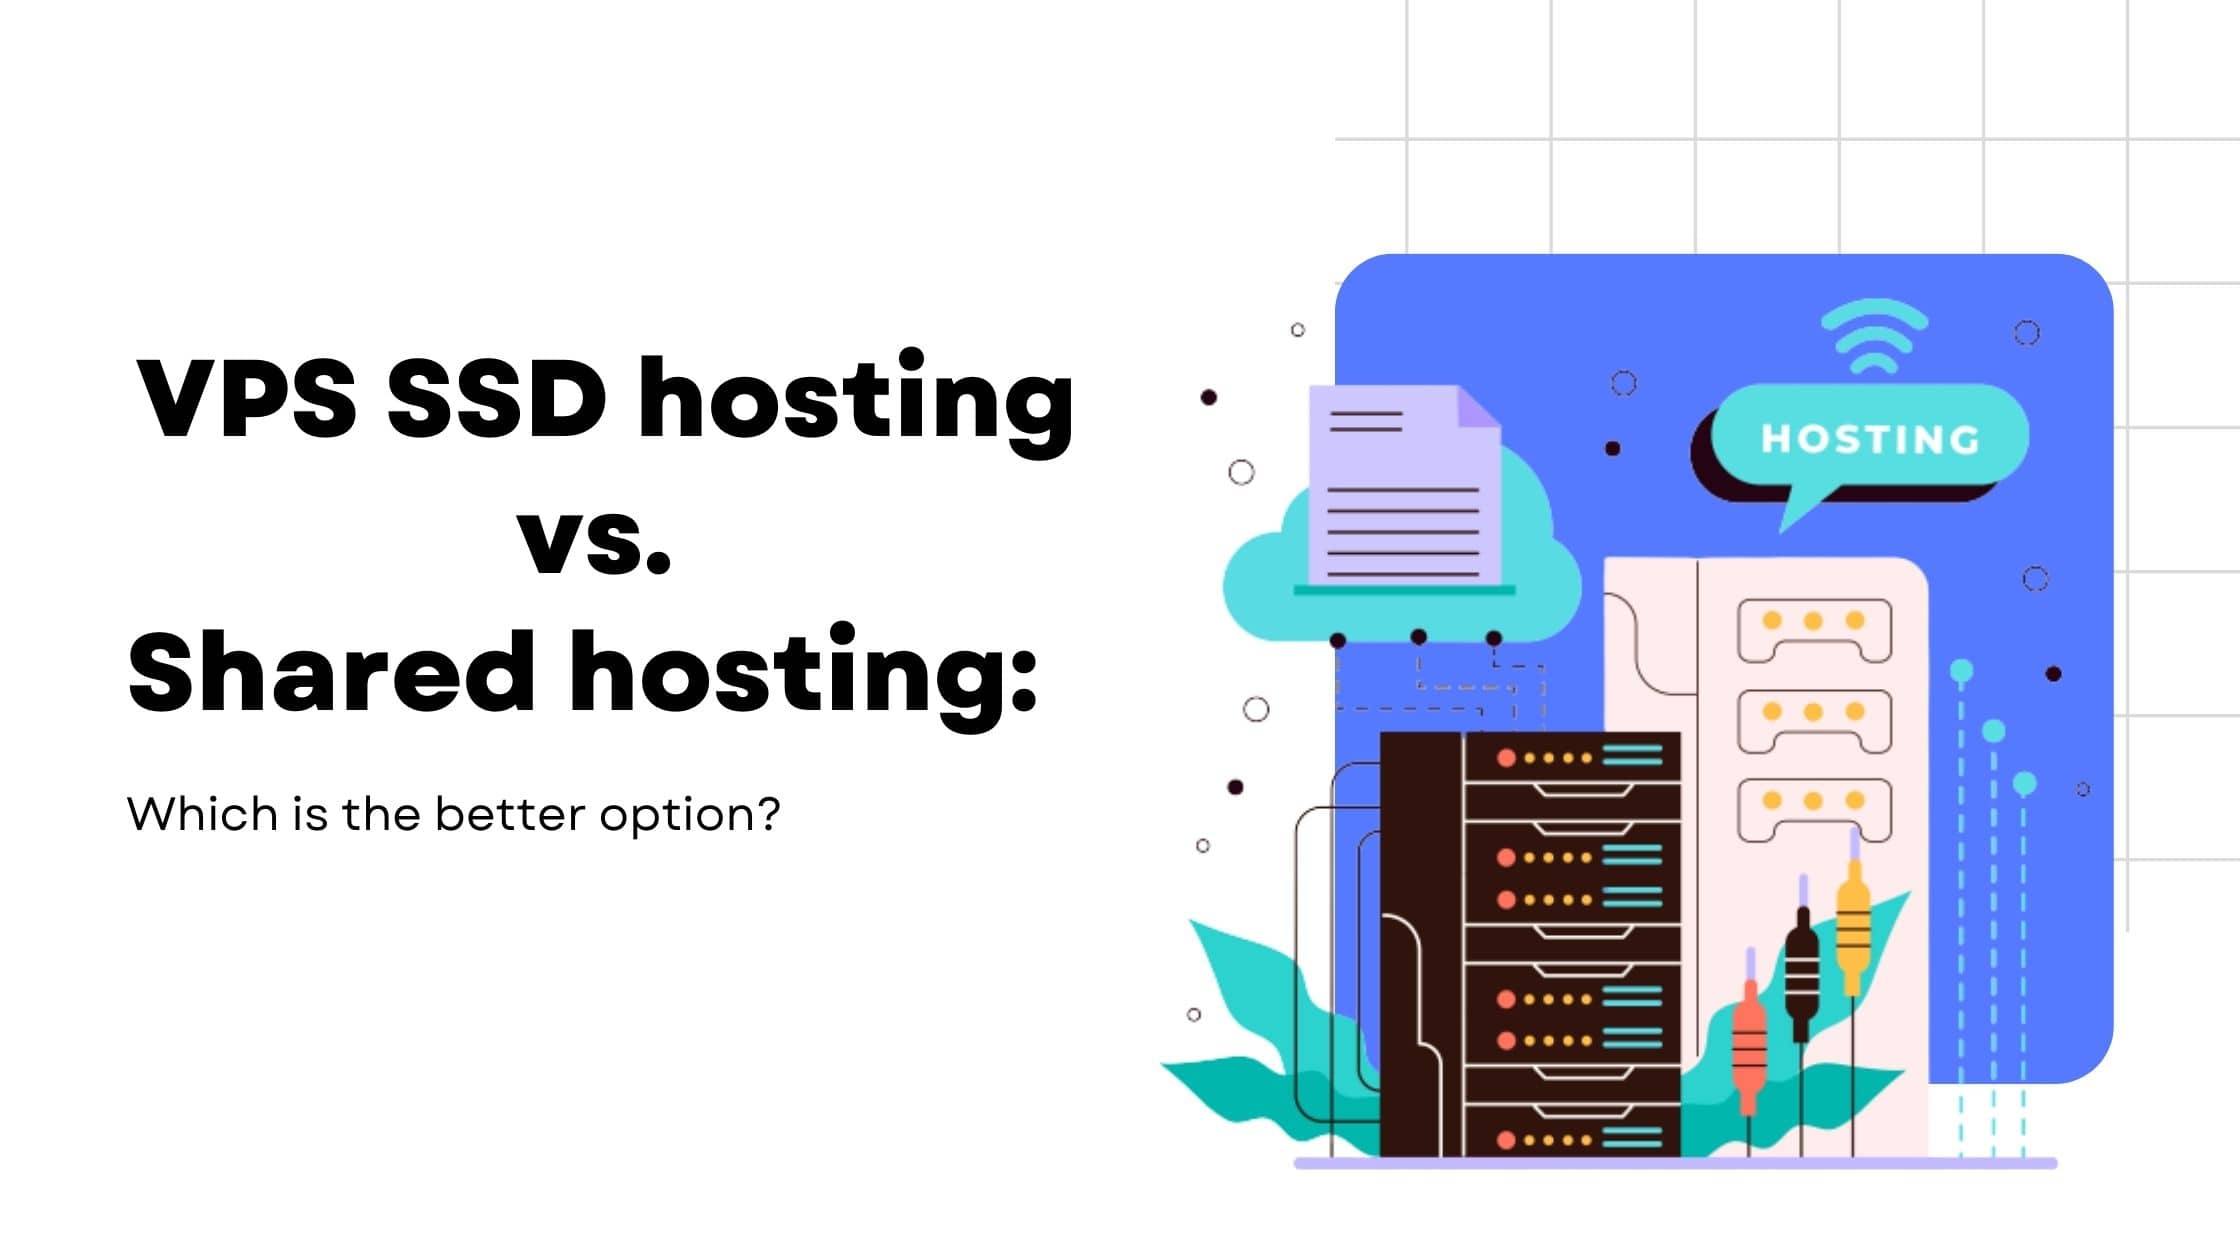 VPS SSD hosting vs. Shared hosting: Which is the better option?